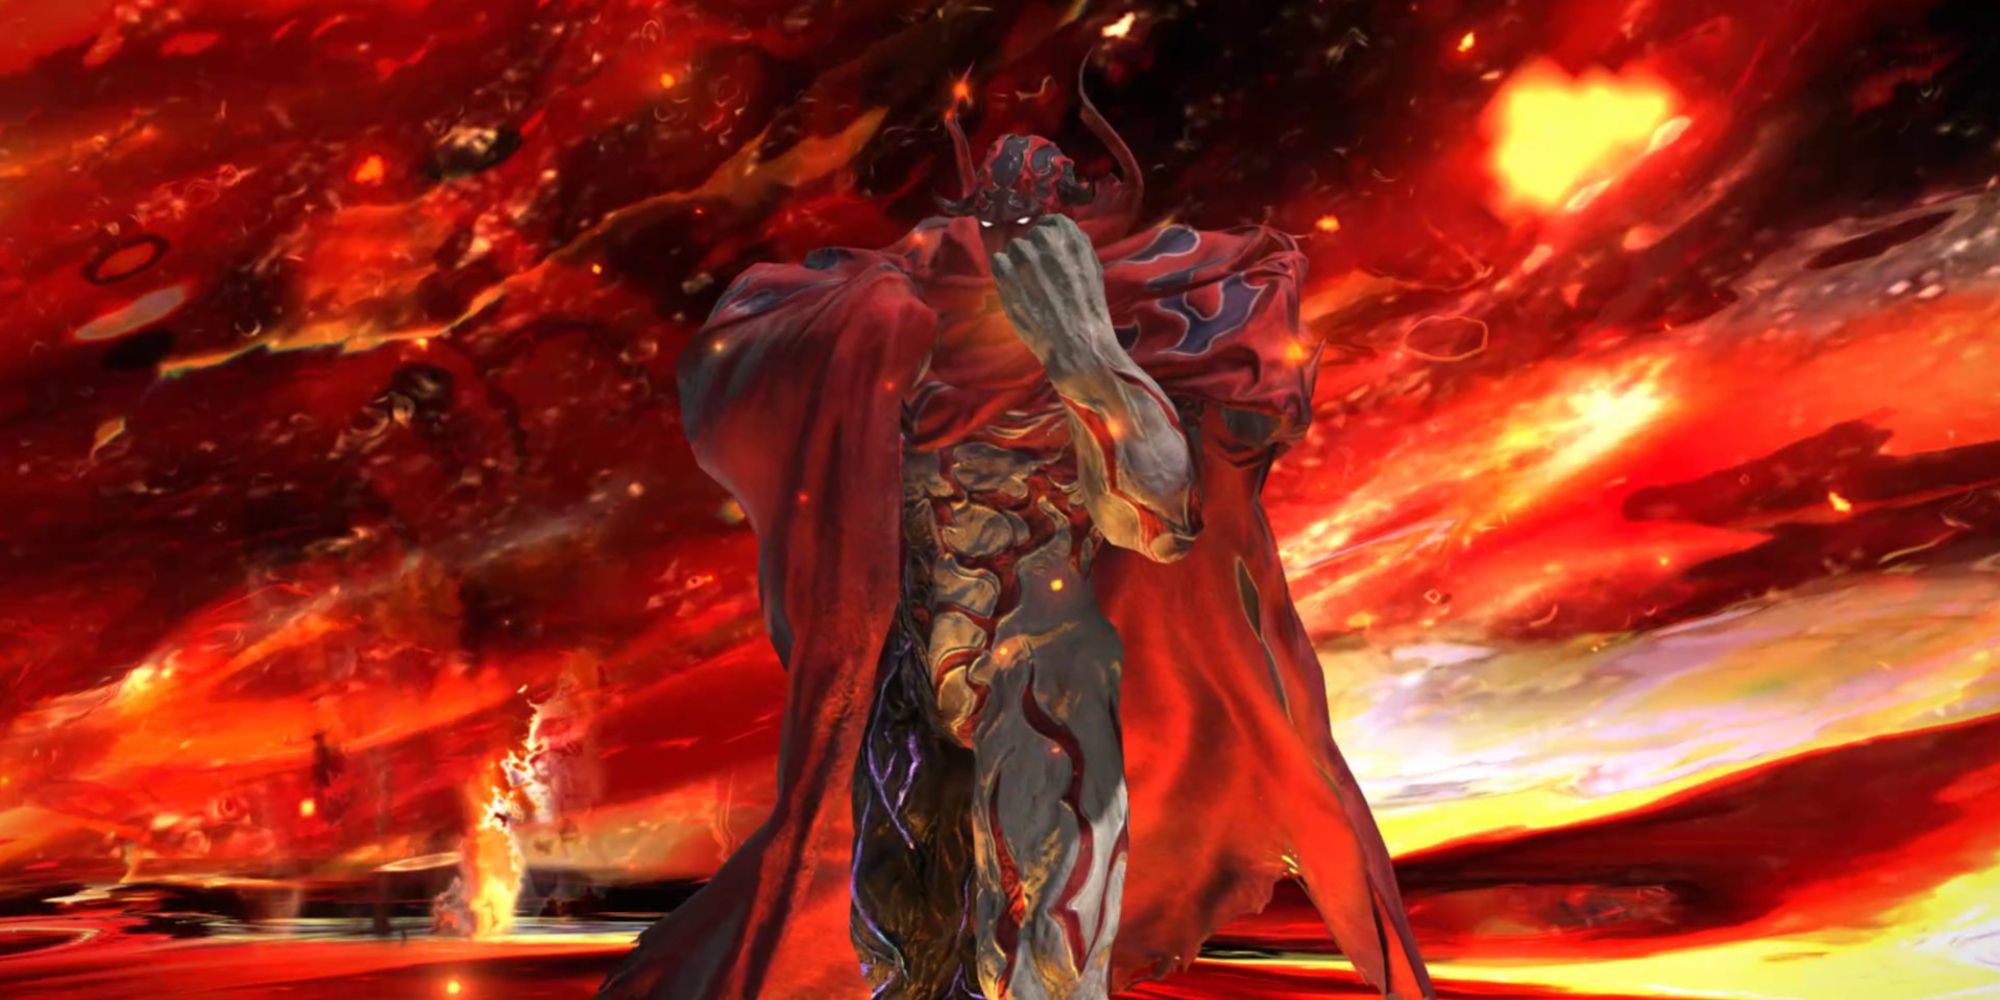 The arch demon Rubicante standing in a whirlwind of fire at the start of the Mount Ordeals Extreme Trial encounter in Final Fantasy 14.